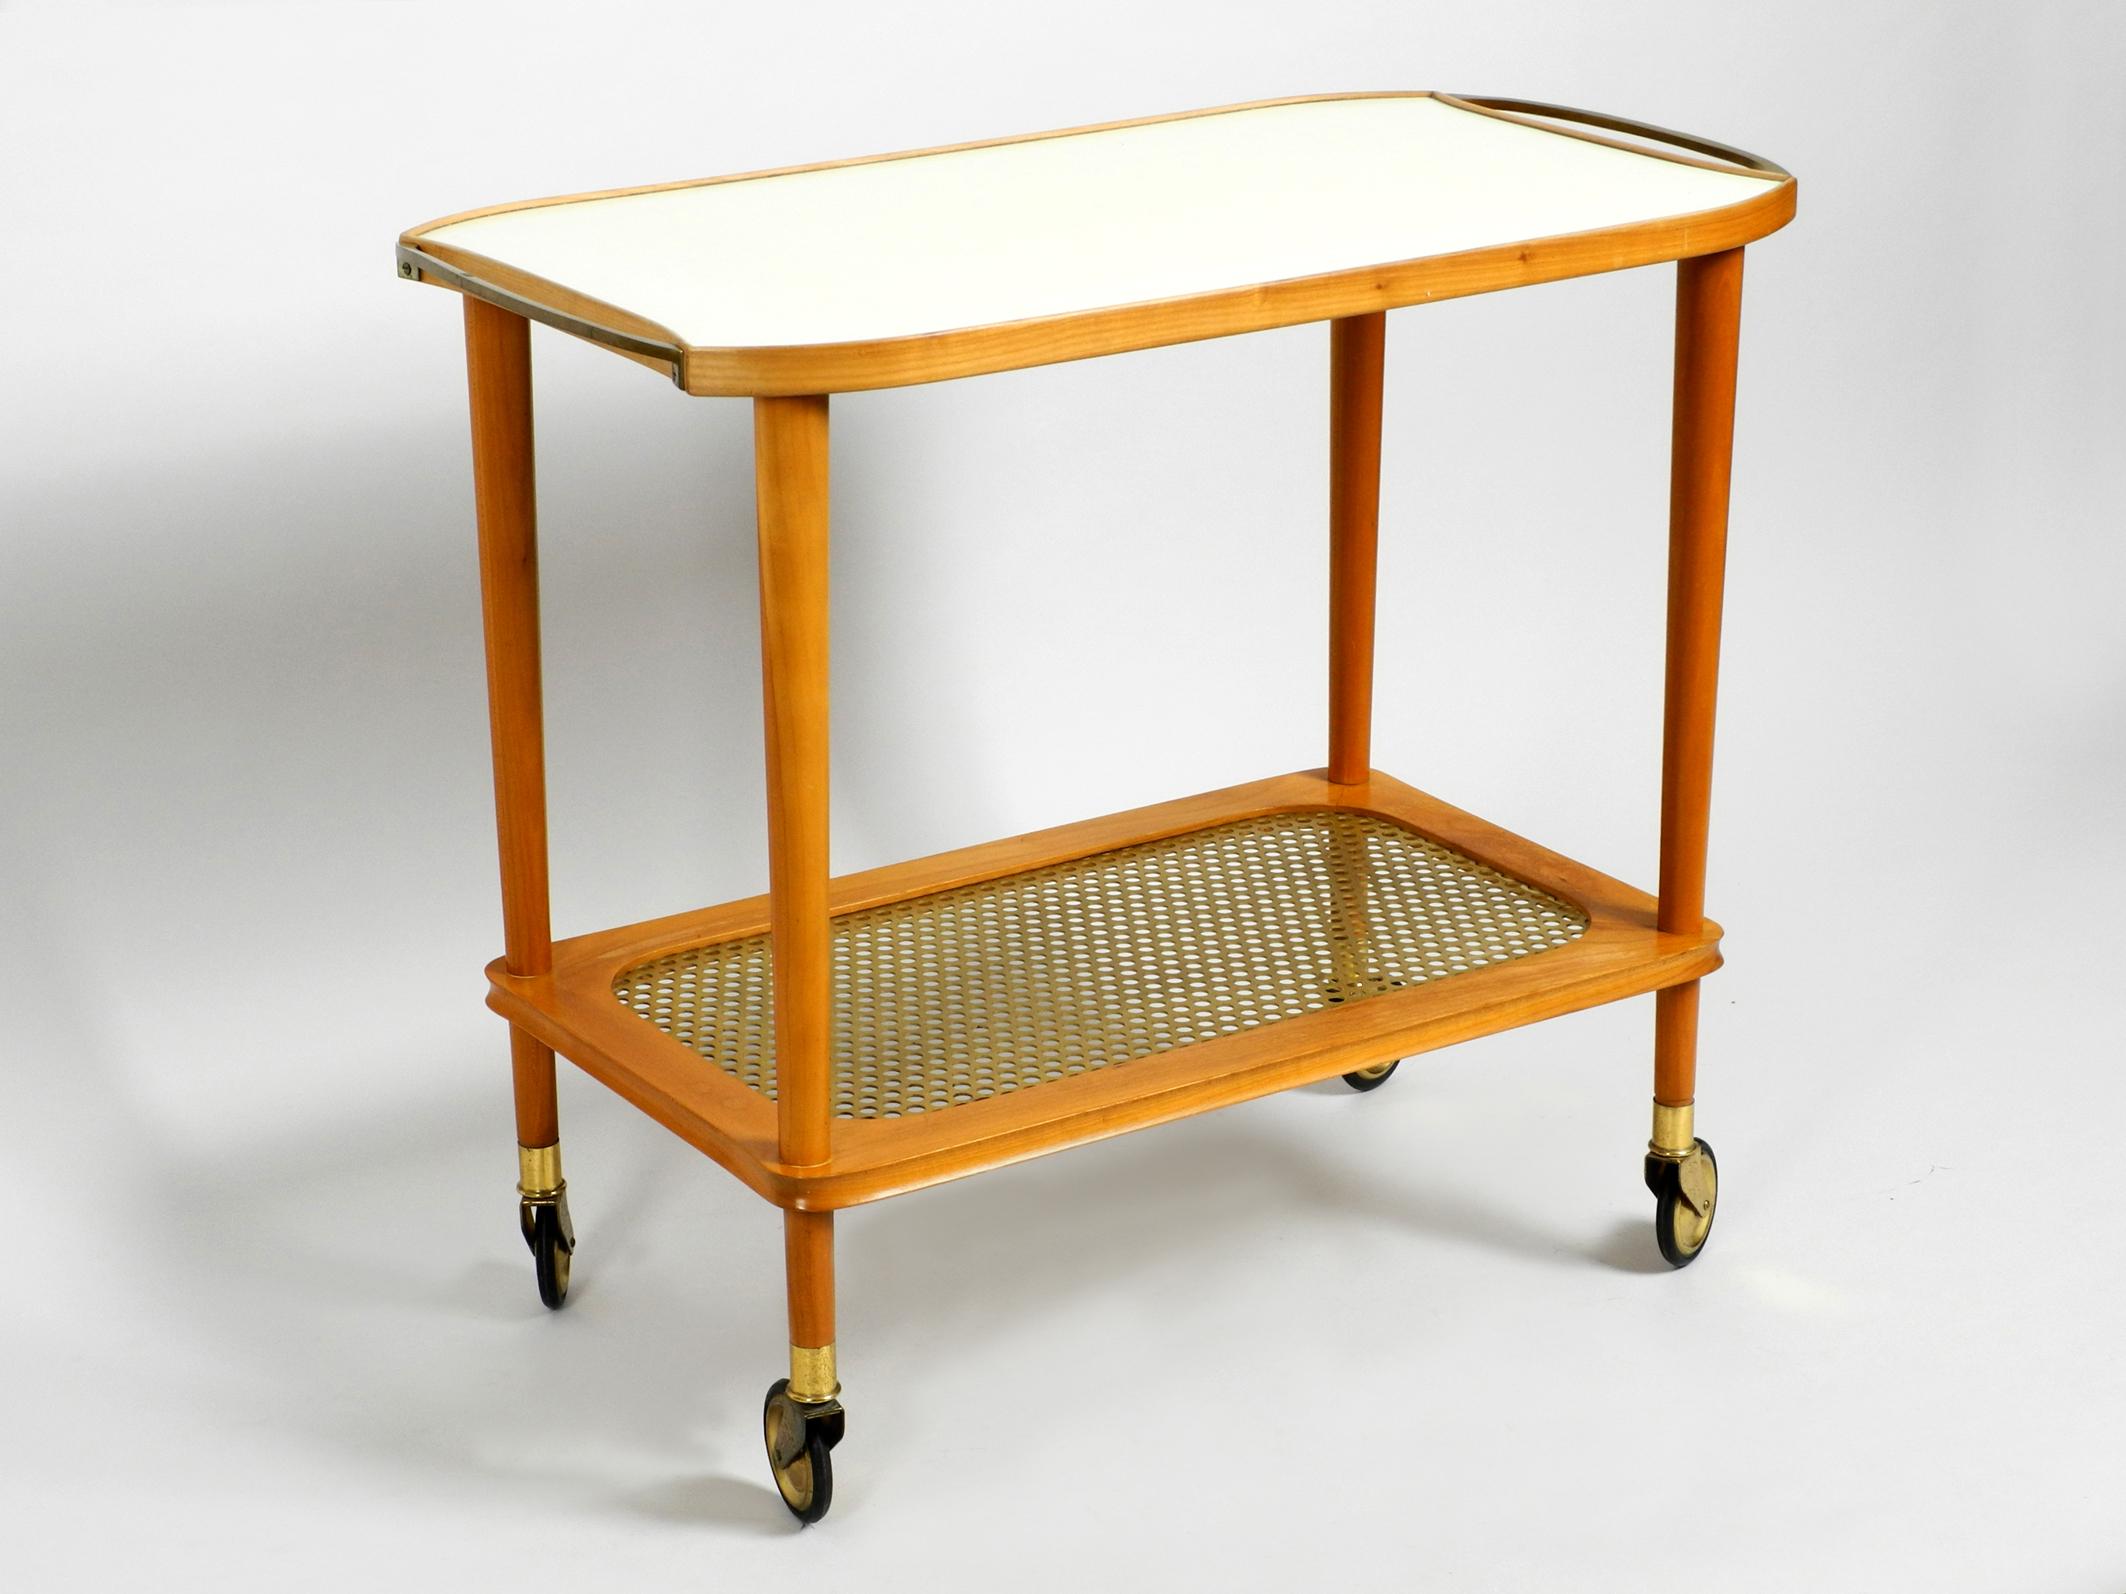 Mid-20th Century Beautiful Mid-Century Modern Serving Trolley Made of Walnut Wood and Brass